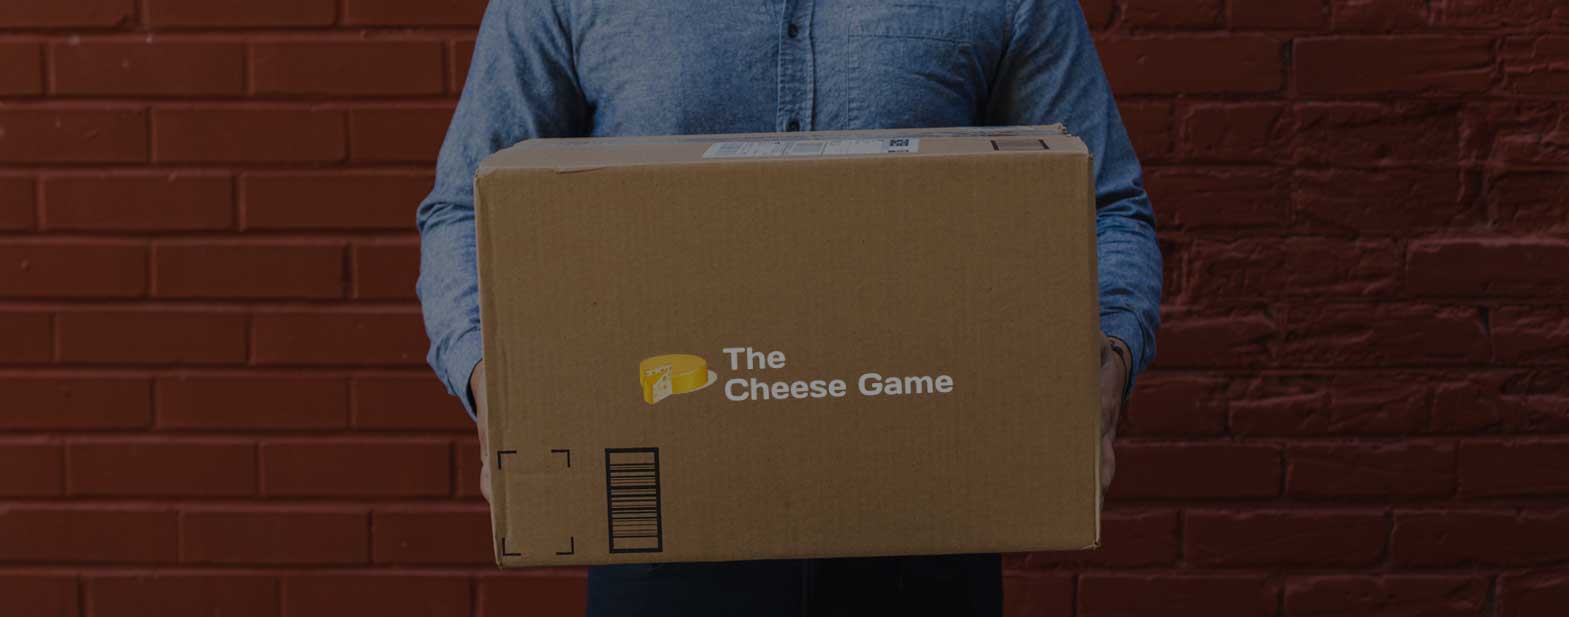 the-chesse-game-delivery